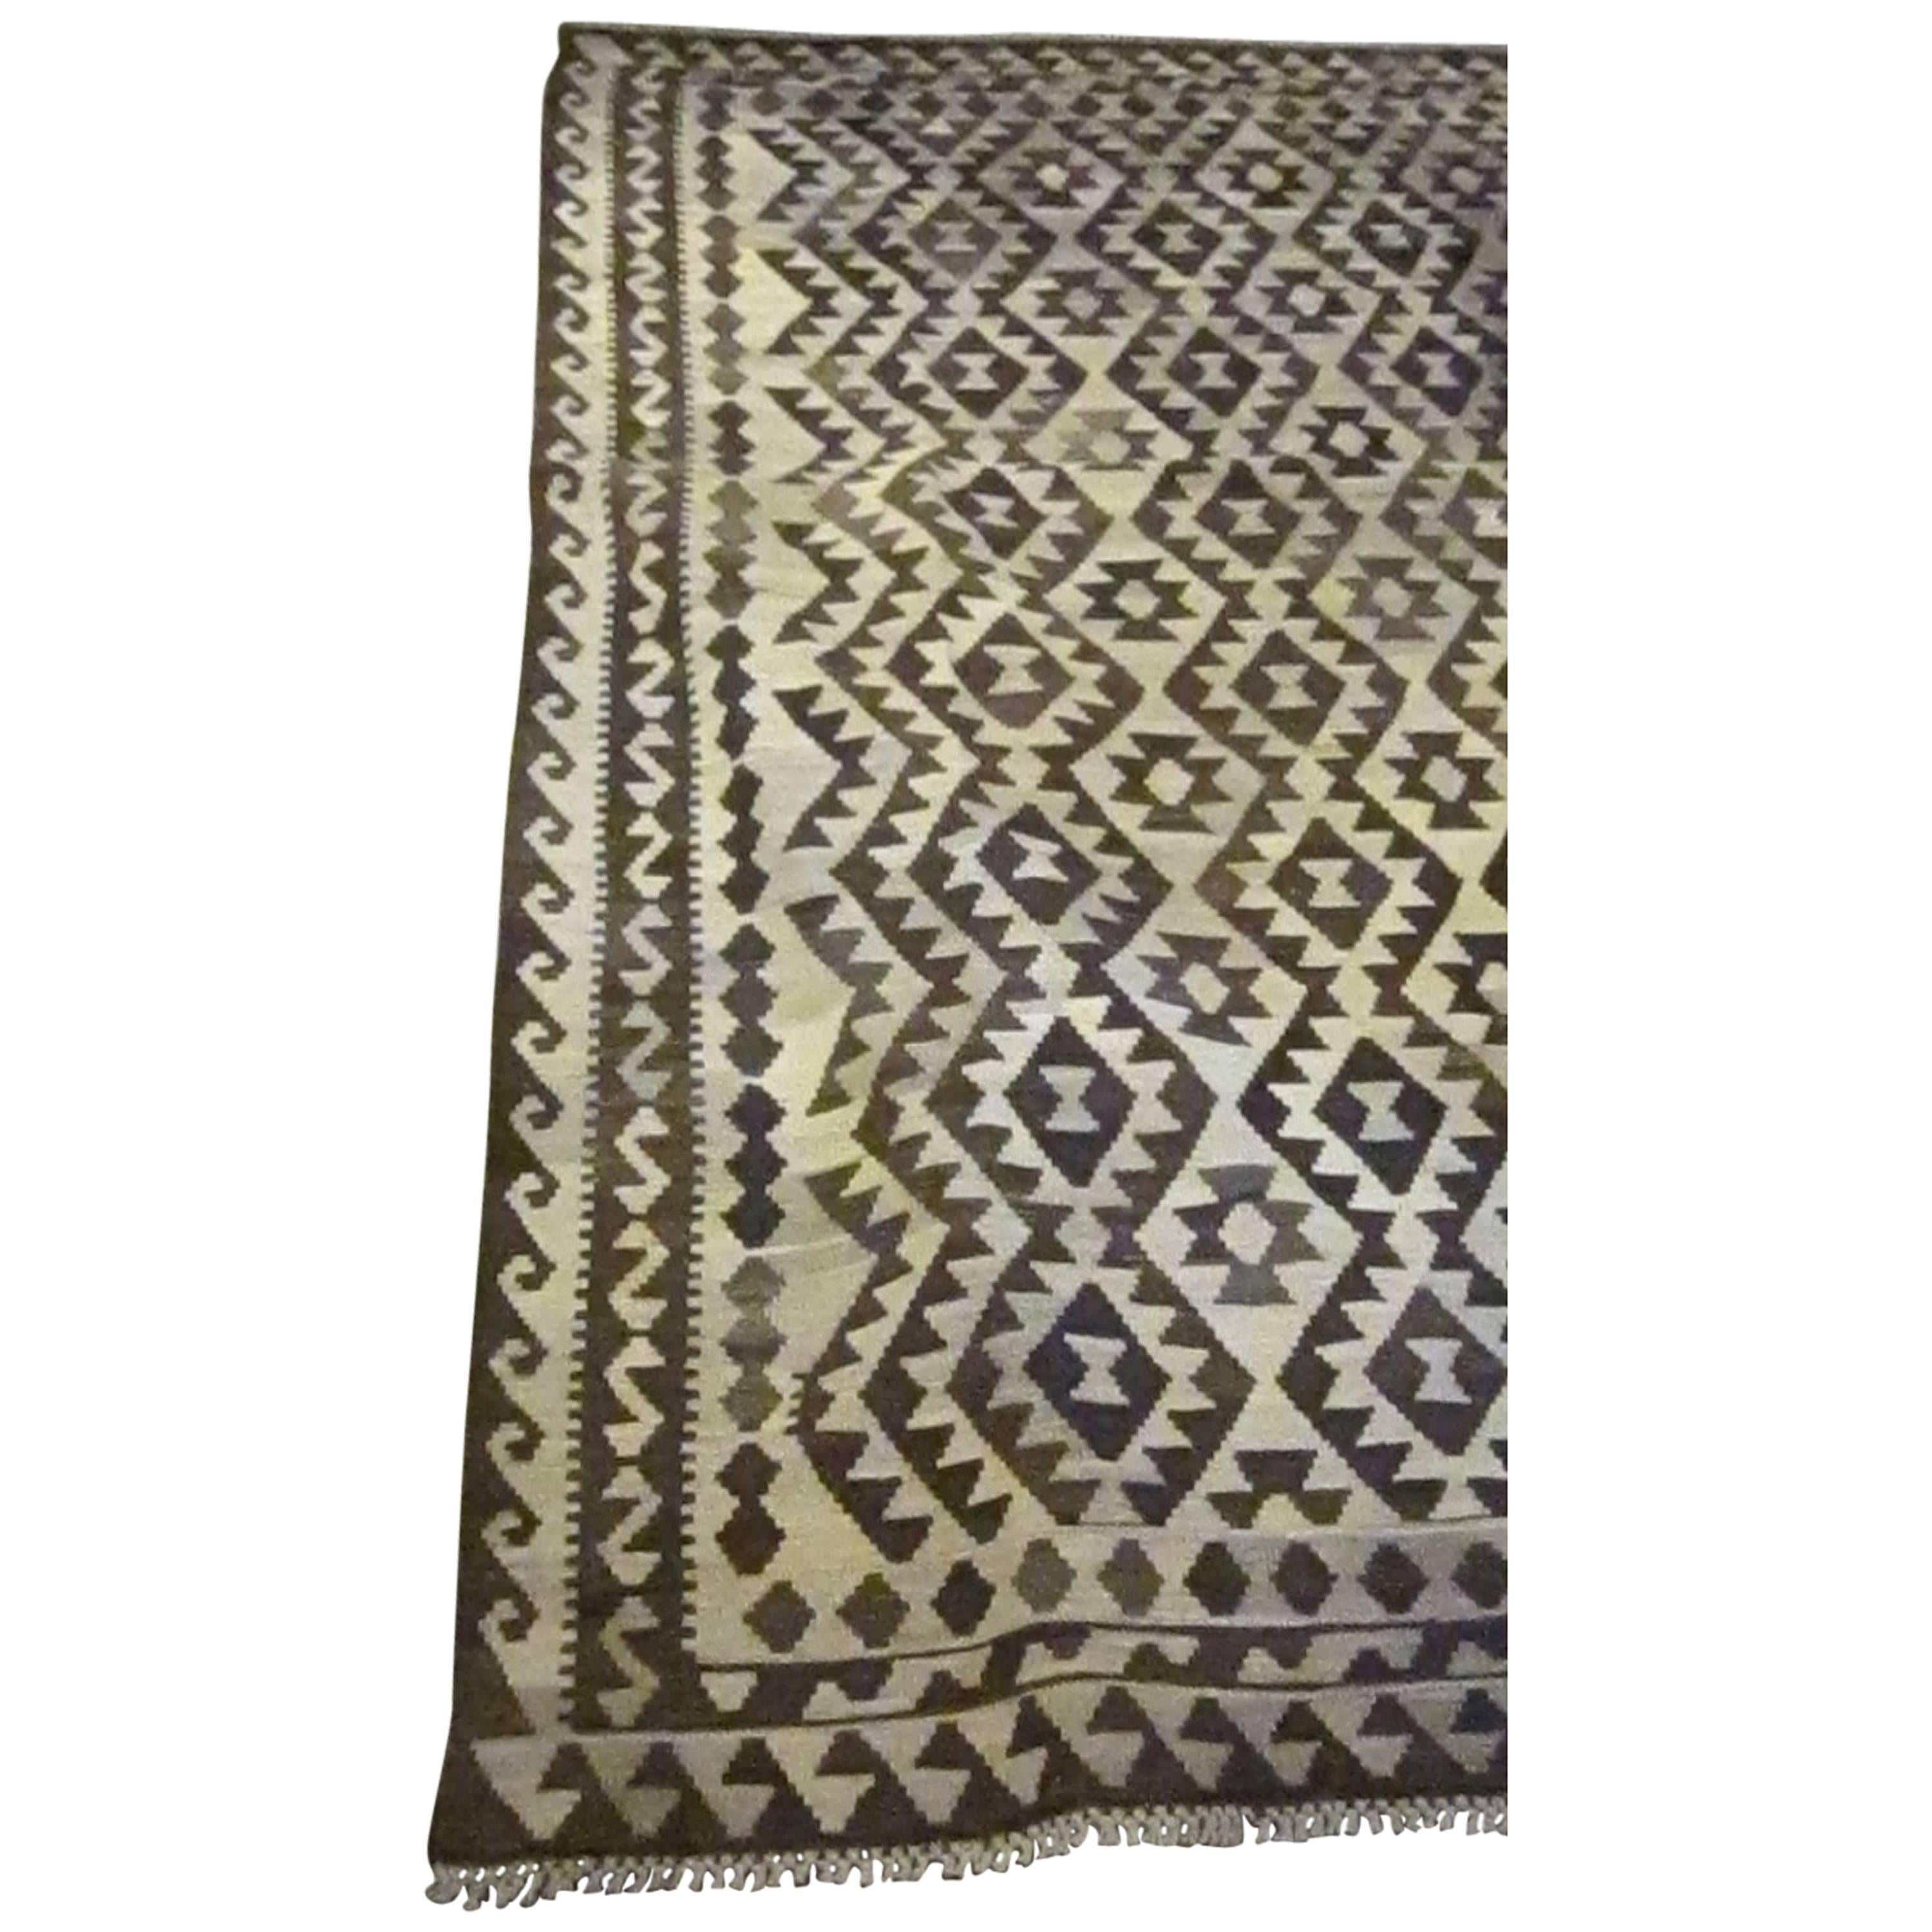 Vegetable Dyed Dark Brown and Cream Kilim For Sale